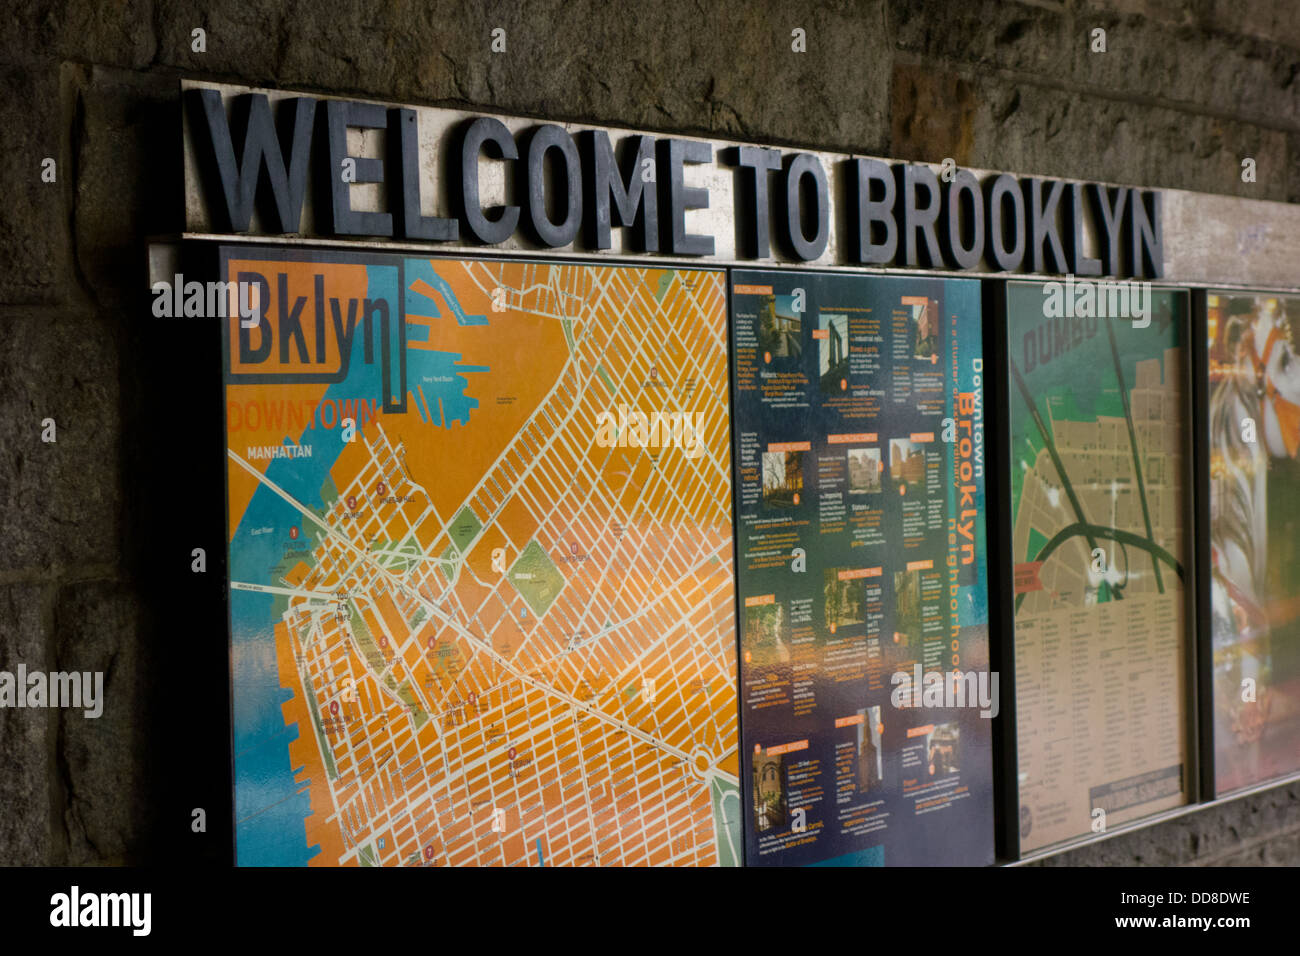 welcome to Brooklyn sign Stock Photo